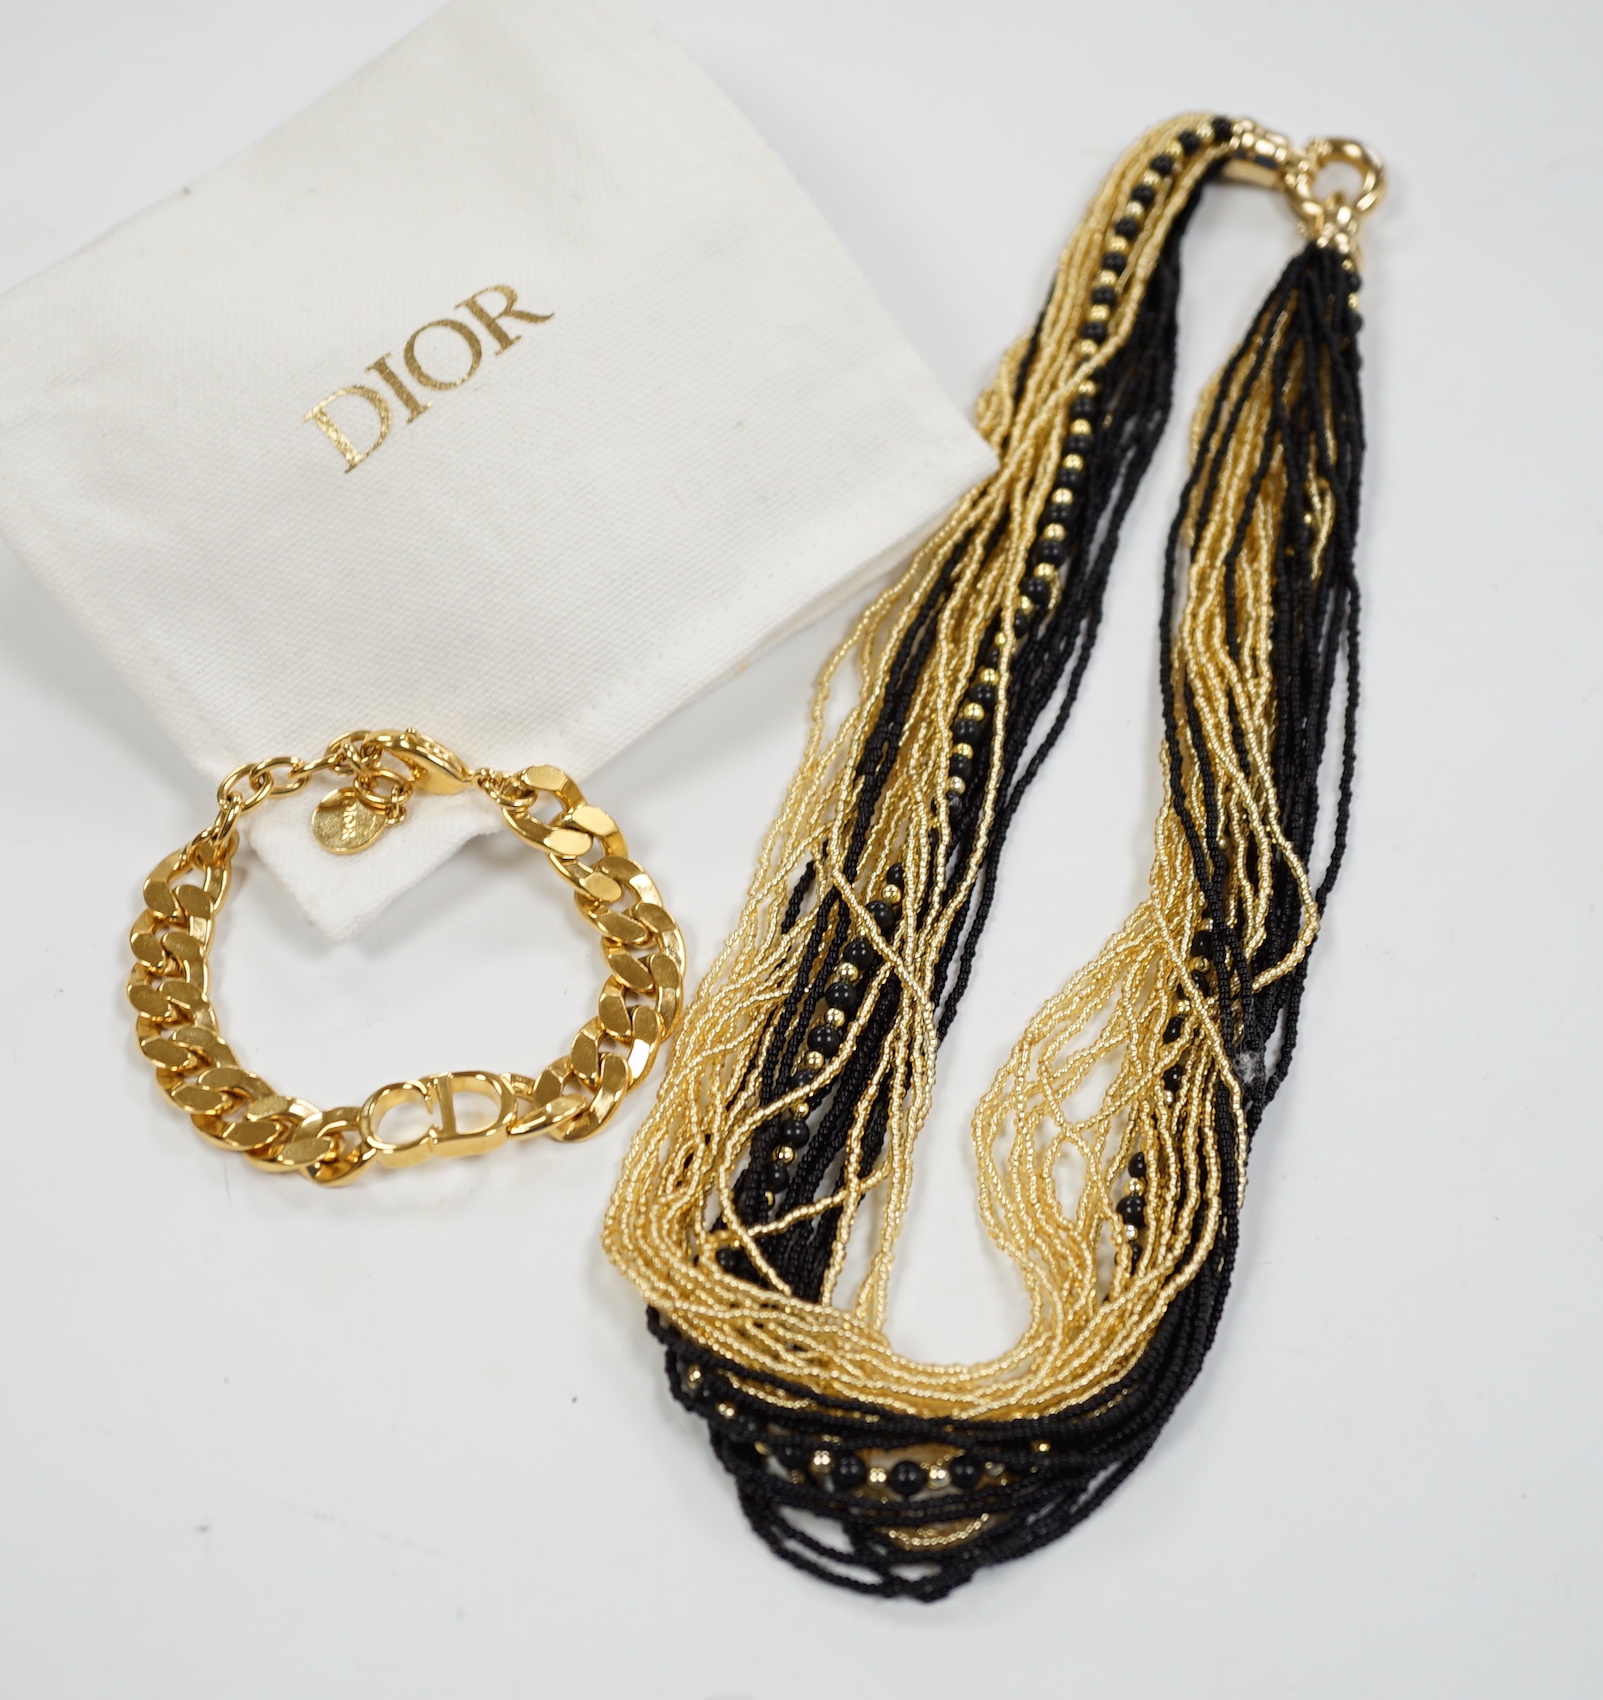 A Christian Dior Danseuse Etoile gilt bracelet, 18cm, with Dior box and pamphlet etc. together with a Luciani Murano glass bead twist necklace, 48cm.